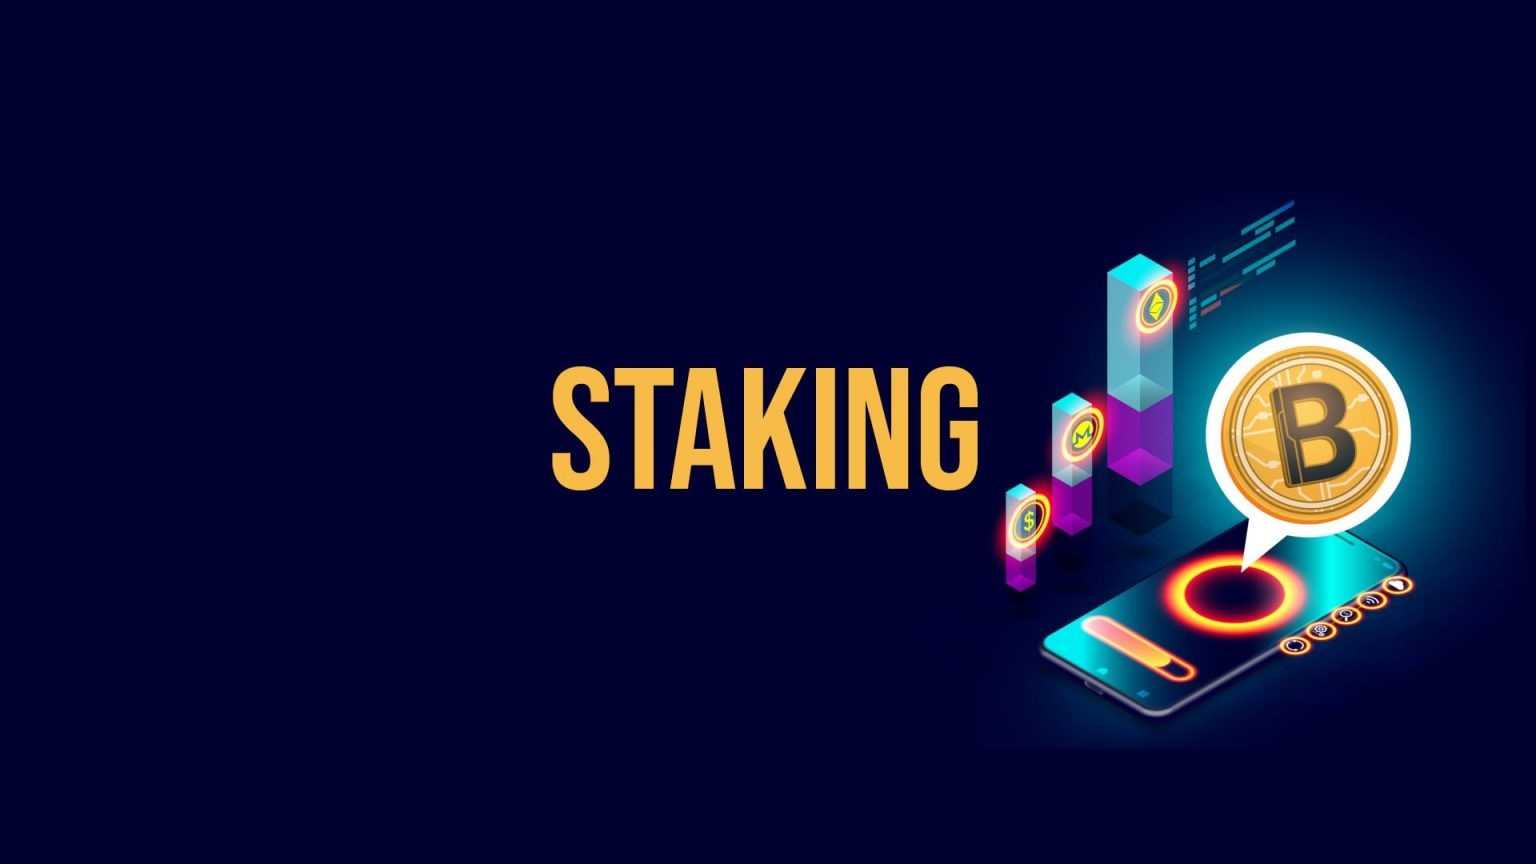 Staking is the locking of cryptocurrencies to receive rewards